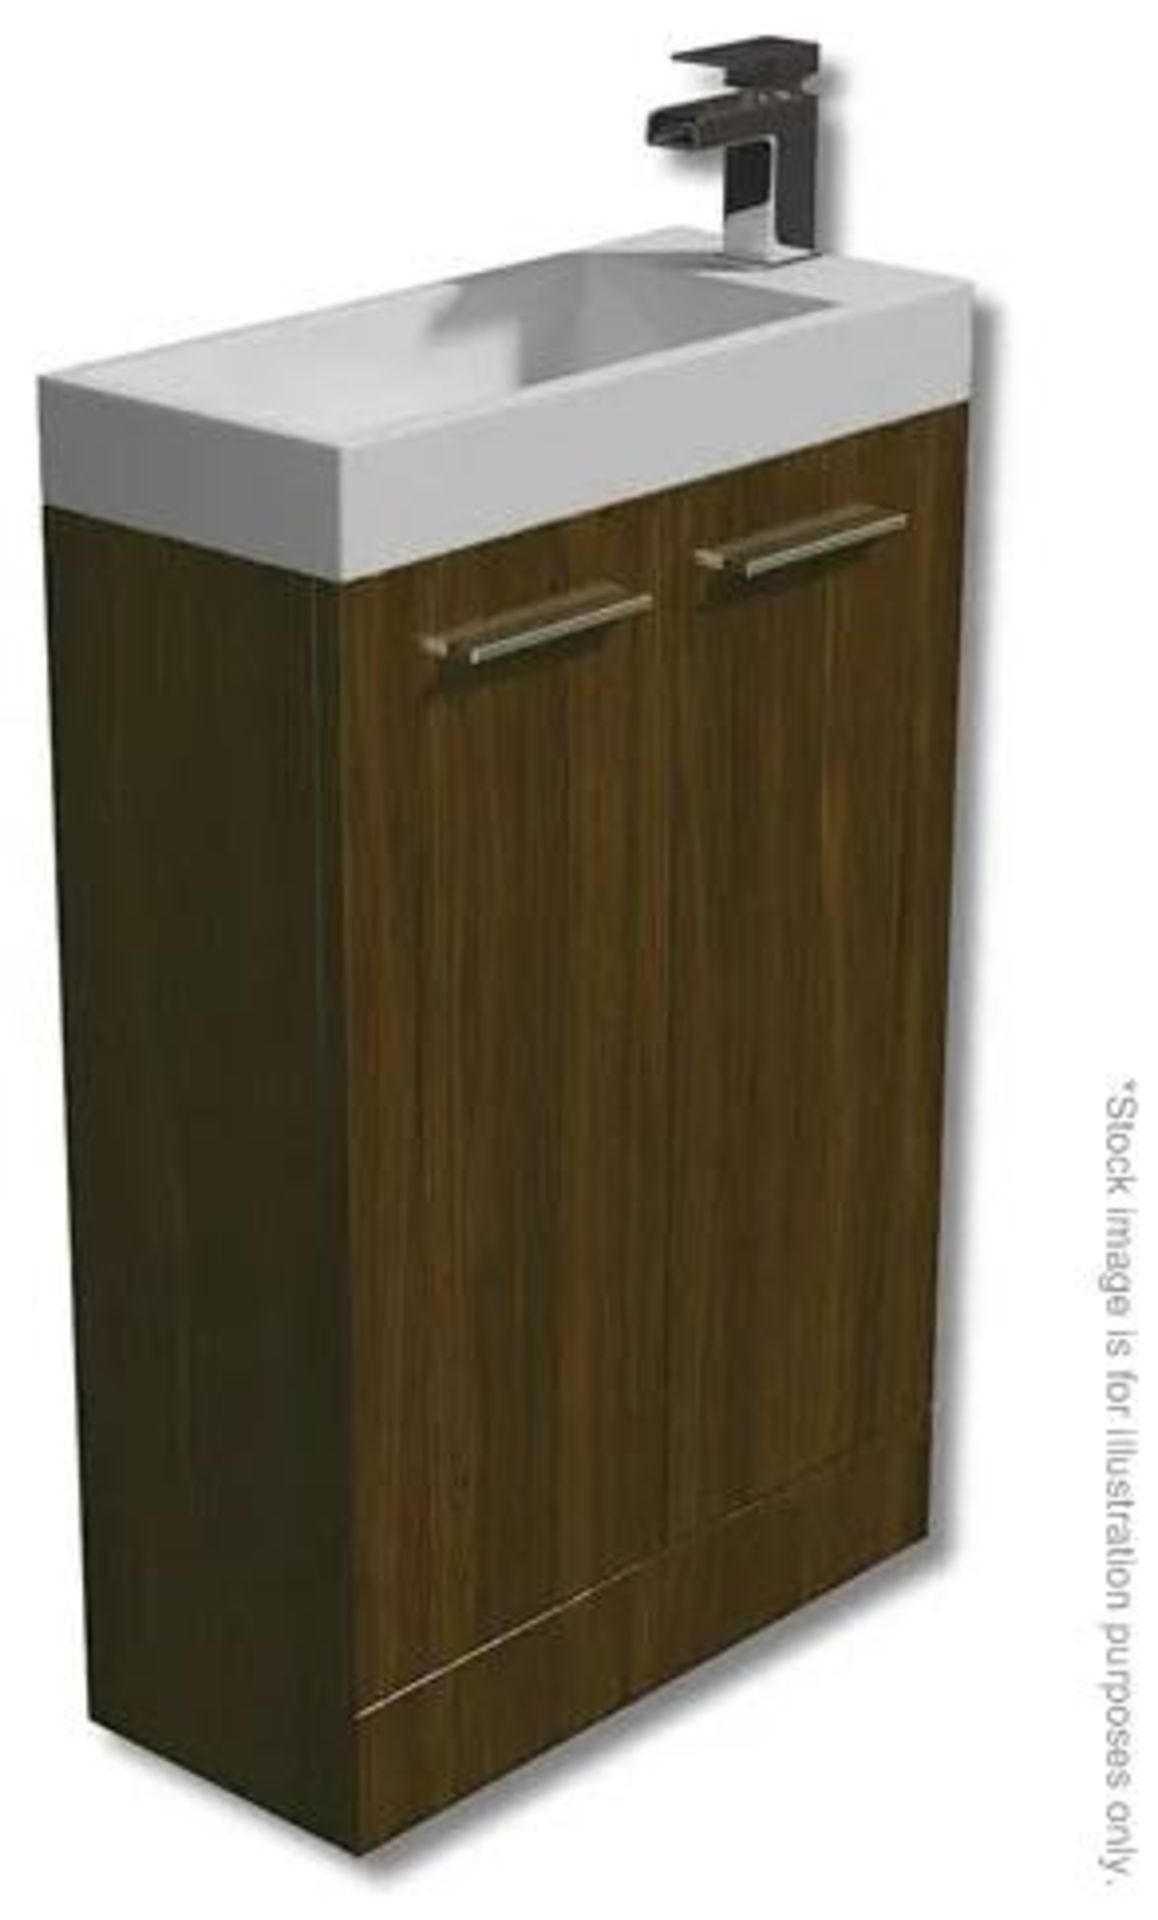 1 x EVORA 560mm Floor Standing Vanity With Ceramin Basin And A Walnut Finish - New & Boxed Stock - C